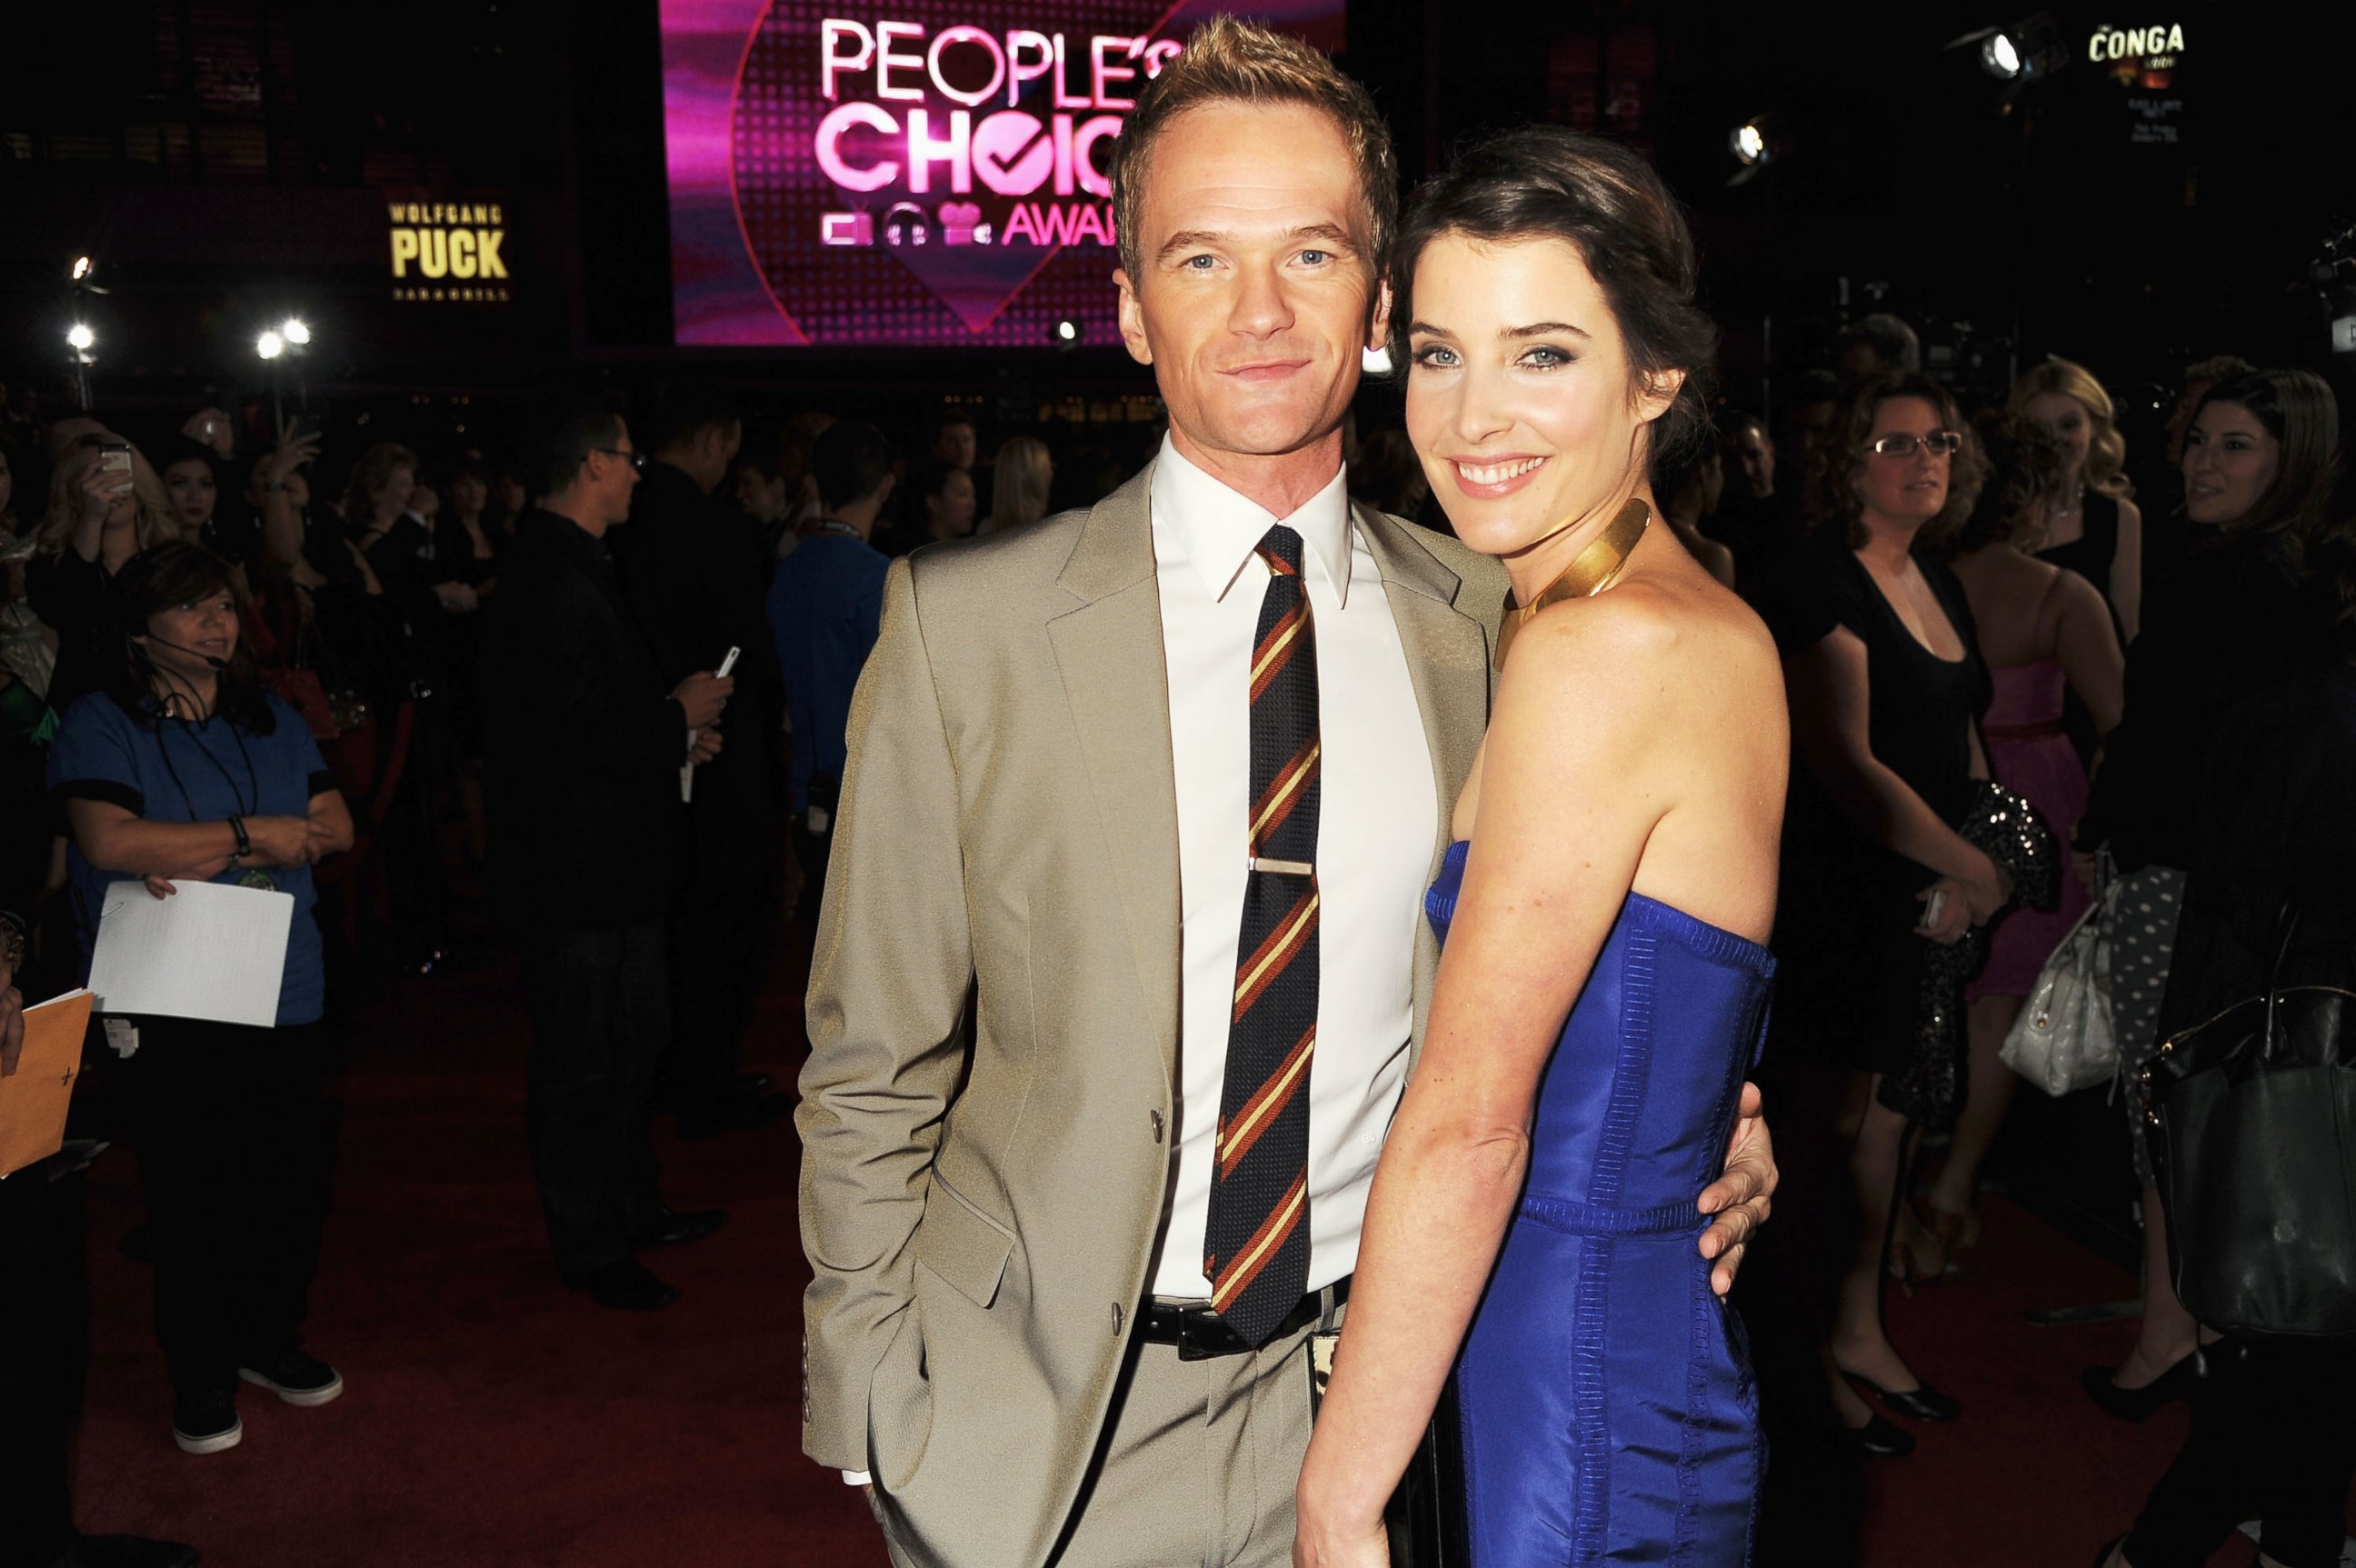 PHOTO: Actor Neil Patrick Harris and actress Cobie Smulders arrive at the 2012 People's Choice Awards at Nokia Theatre L.A. Live, on Jan. 11, 2012, in Los Angeles.